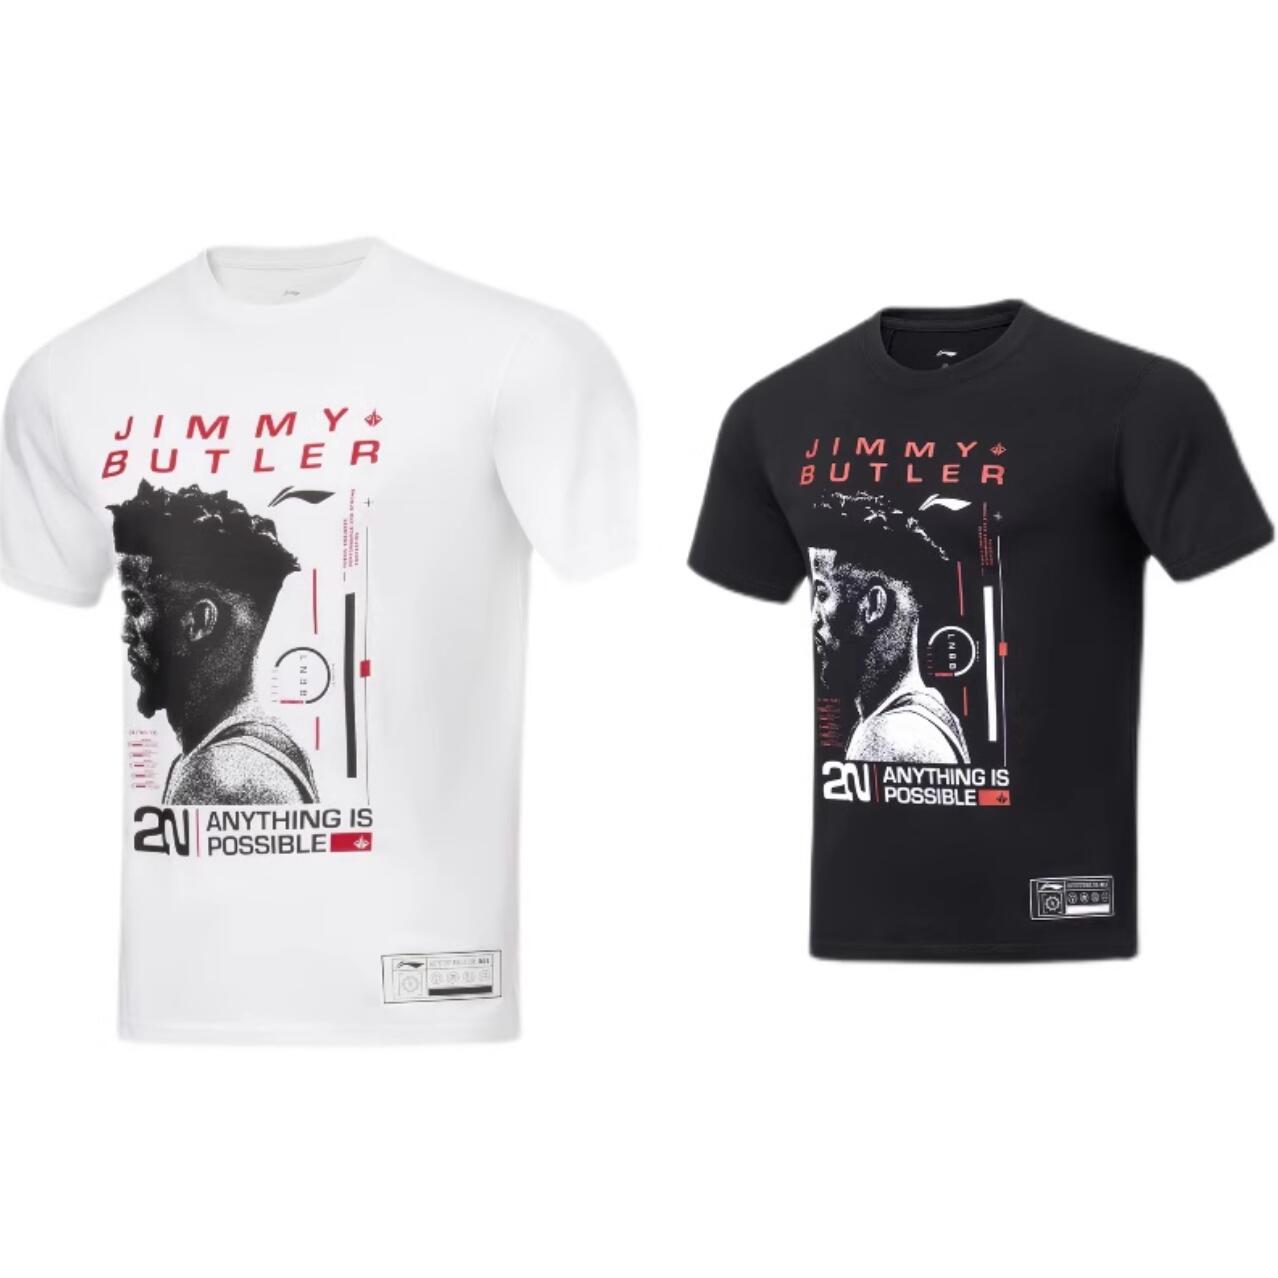 Li-Ning Jimmy Butler Image 22 Tee Shirts in Black and White for 2023 NBA  Finals – LiNing Way of Wade Sneakers